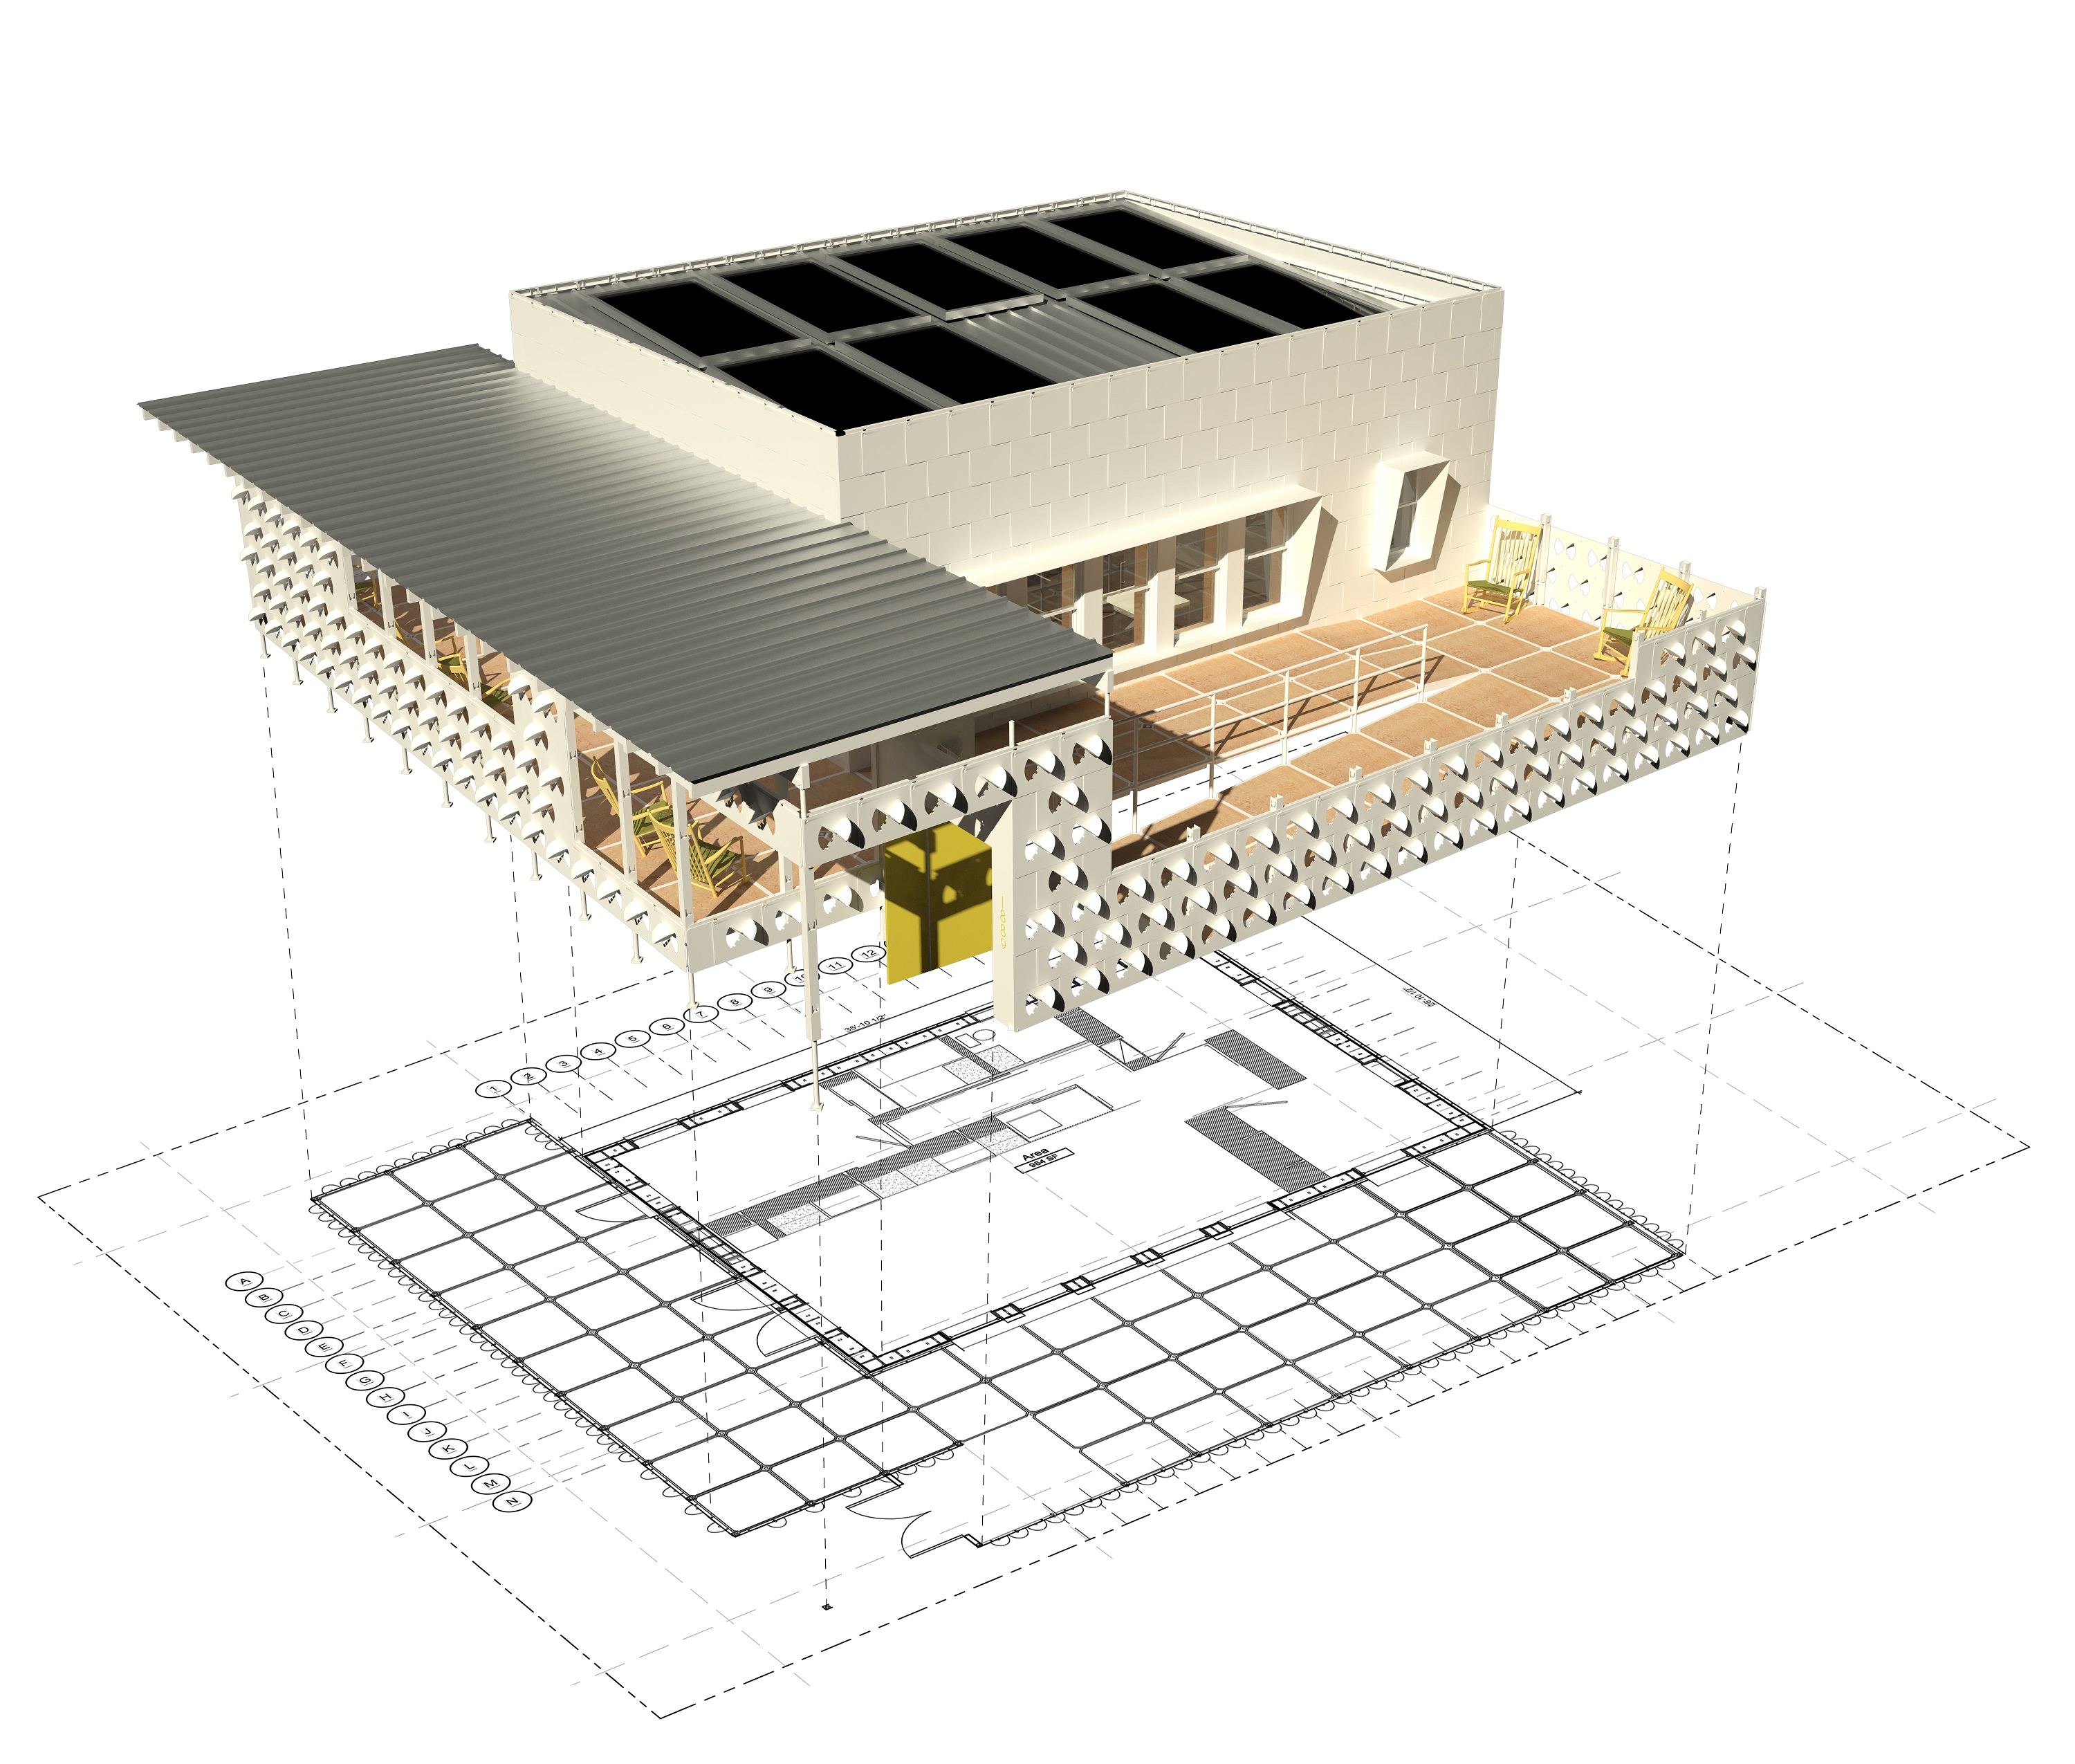 Computer-generated illustration of a modern house hovering above its blueprint floor plans.